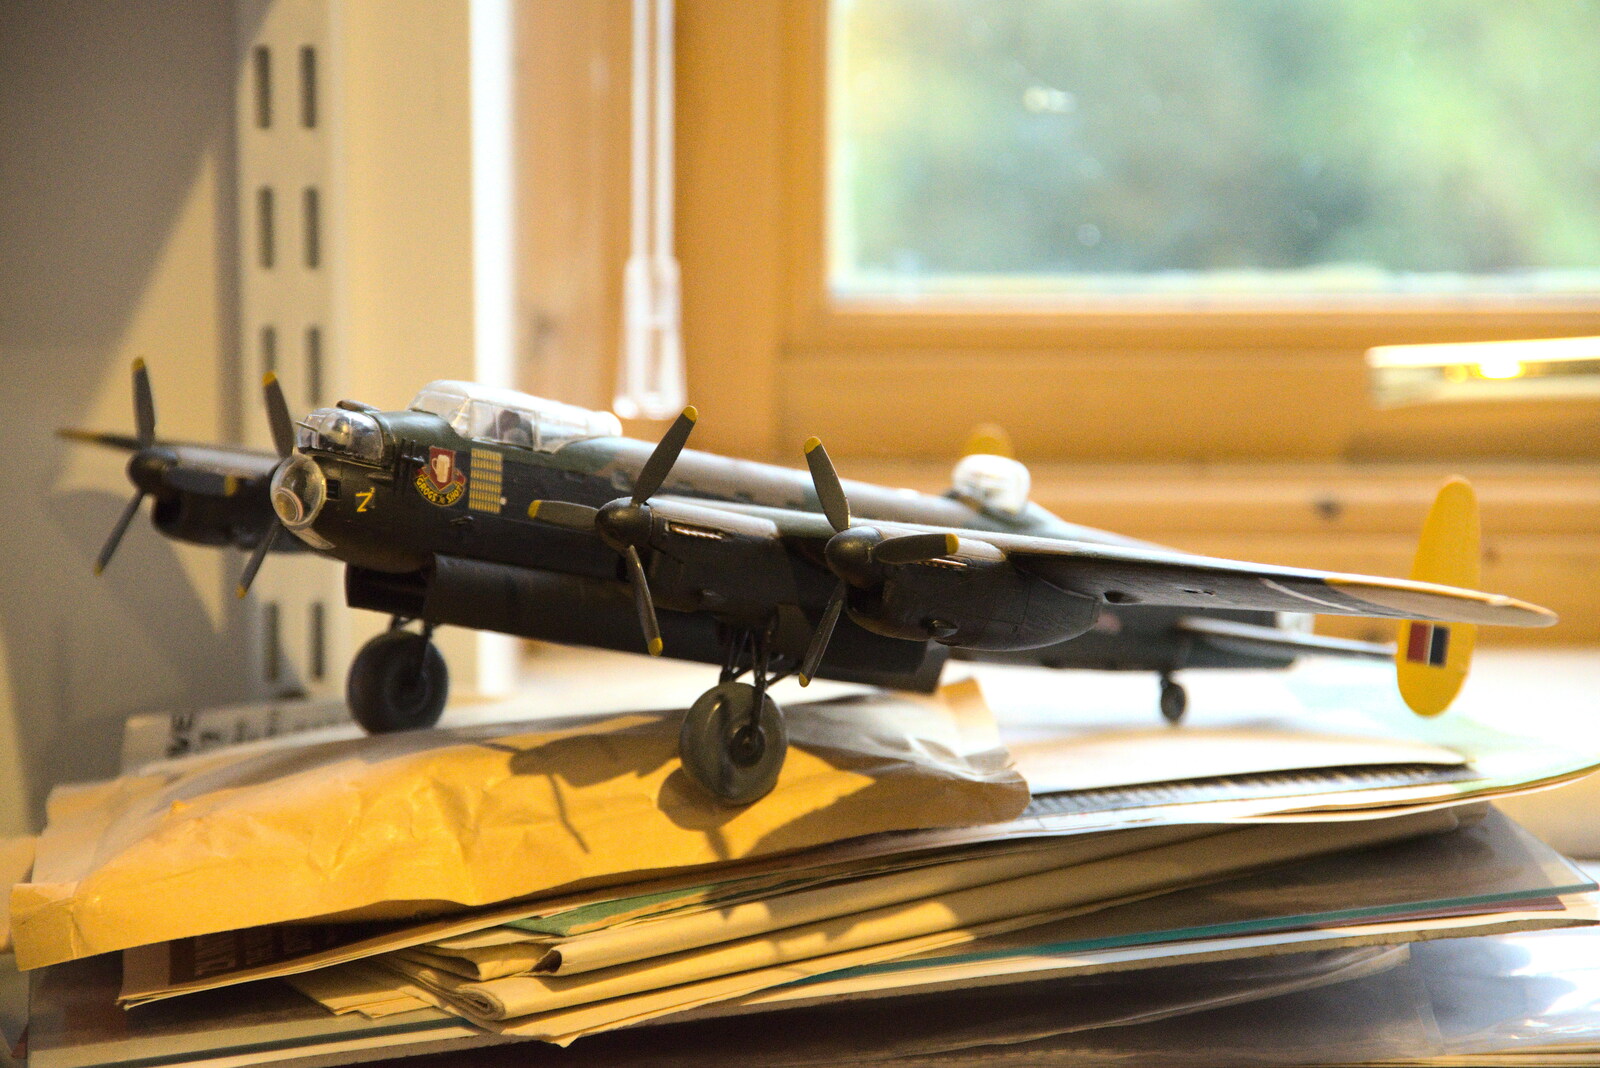 Nosher's Lancaster model is now in the office from Norwich Lights and a Village Hall Jumble Sale, Brome, Suffolk - 20th November 2021